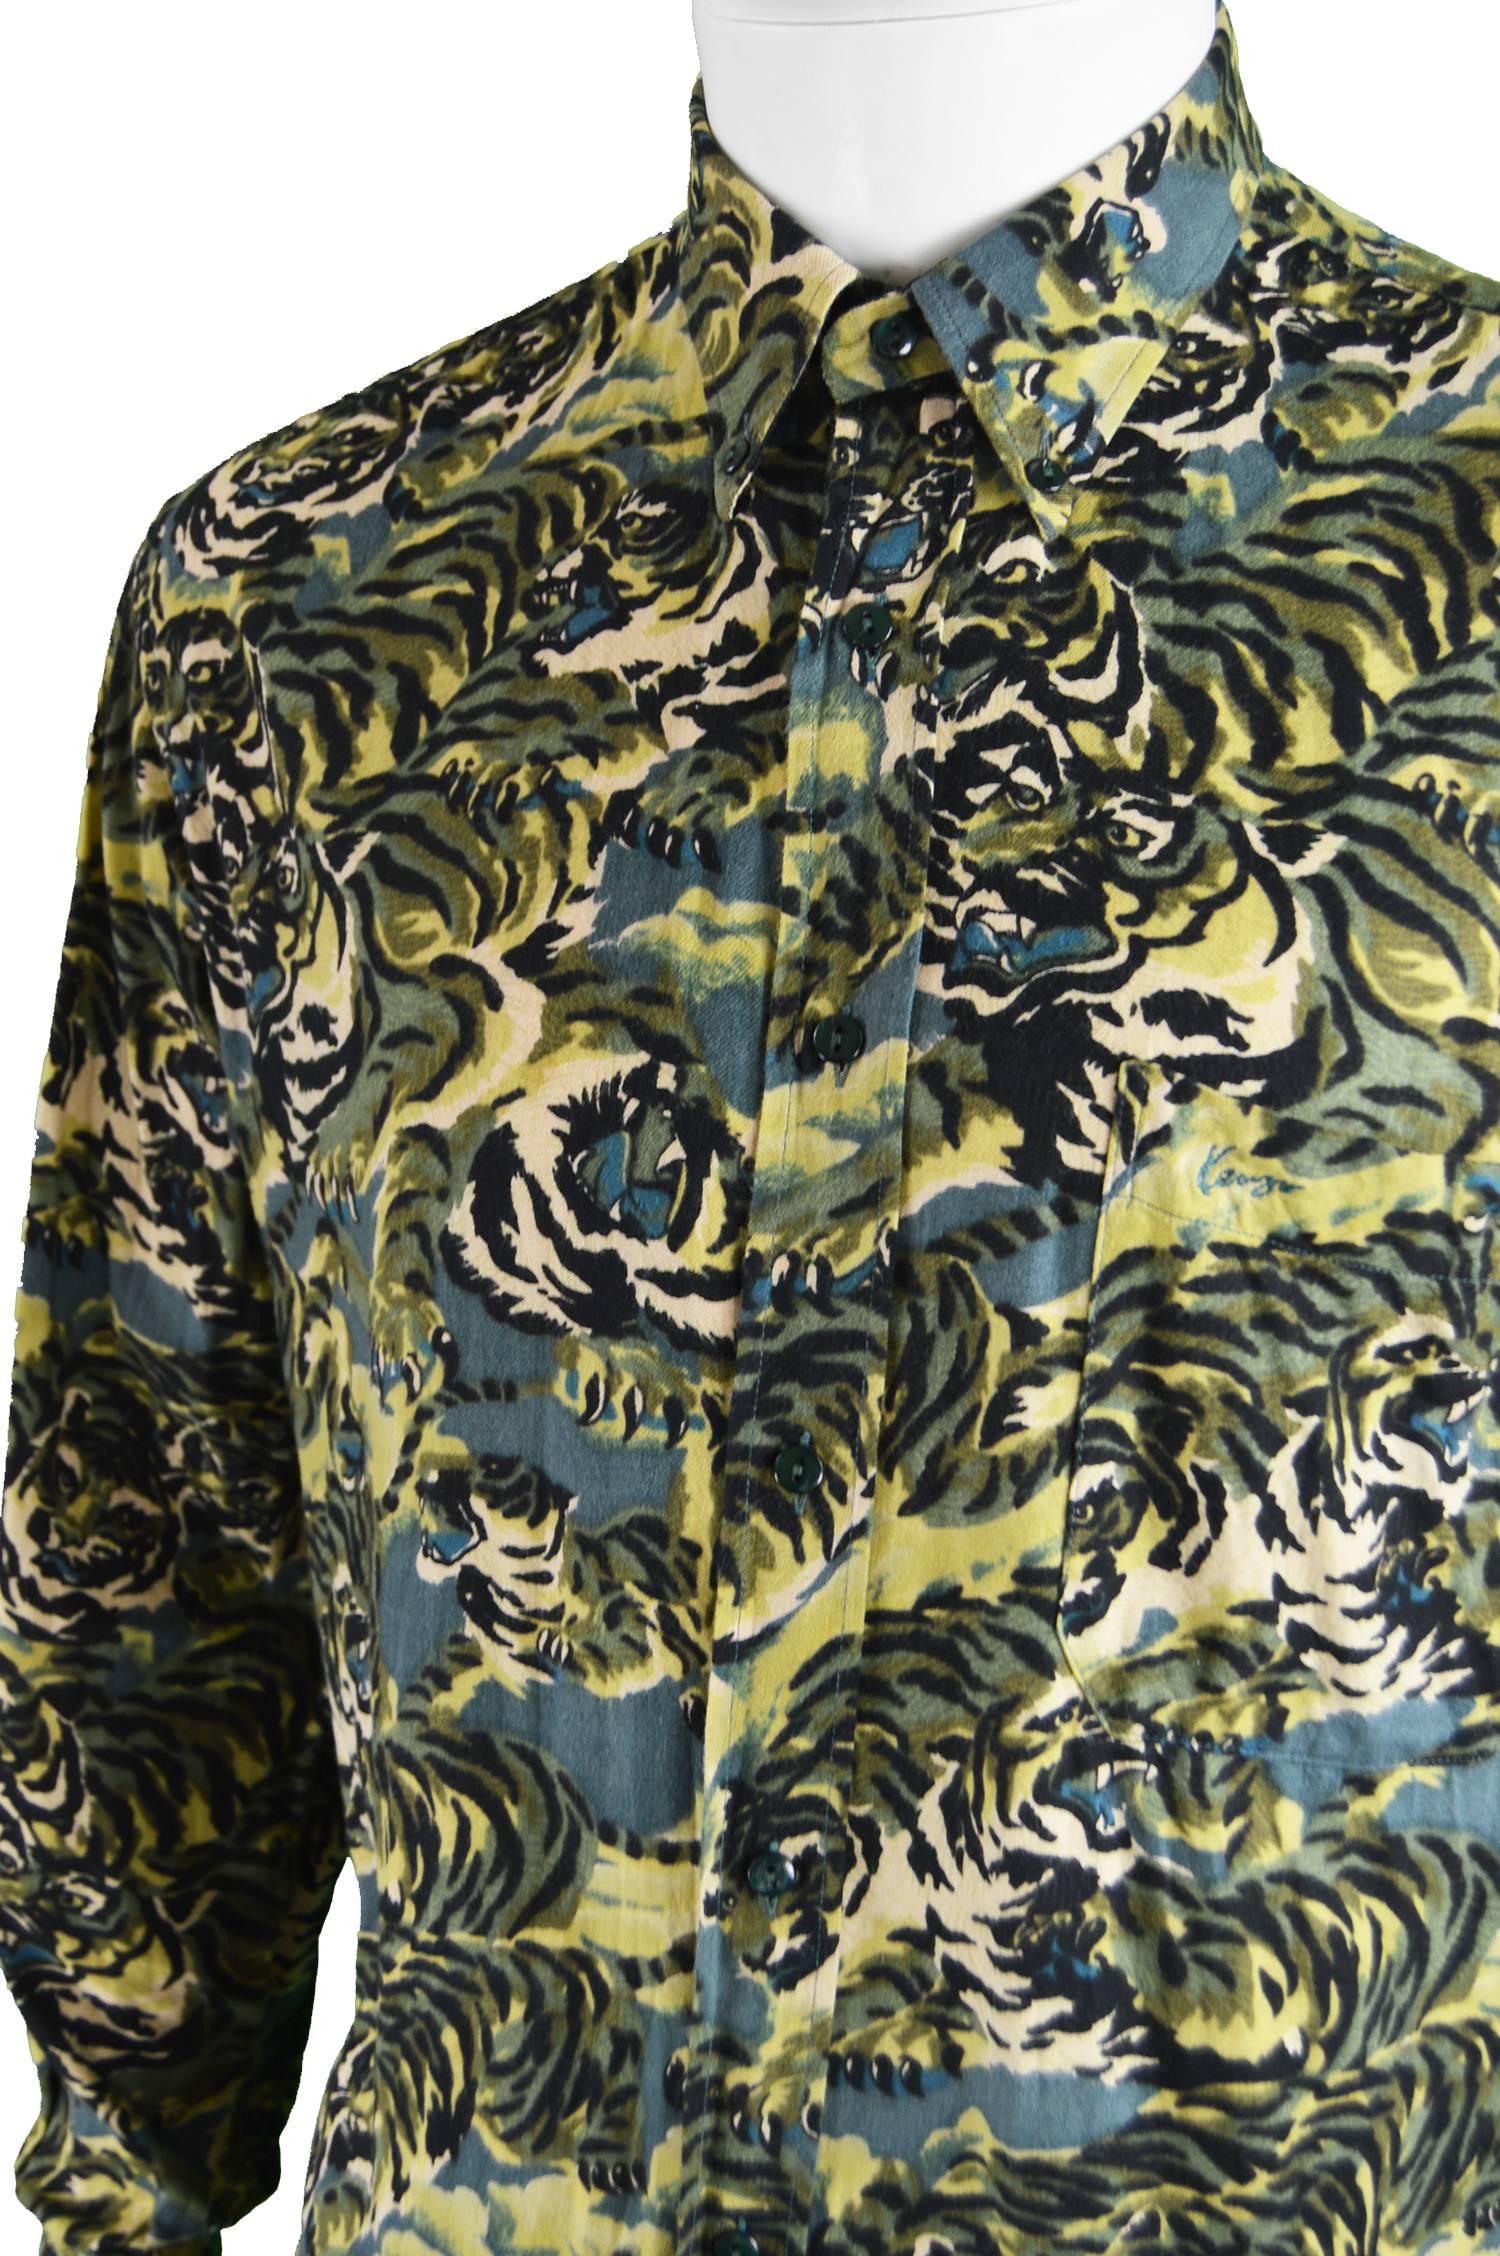 Women's or Men's Kenzo Men's Vintage Iconic 'Flying Tiger' Print Button Down Shirt, 1990s